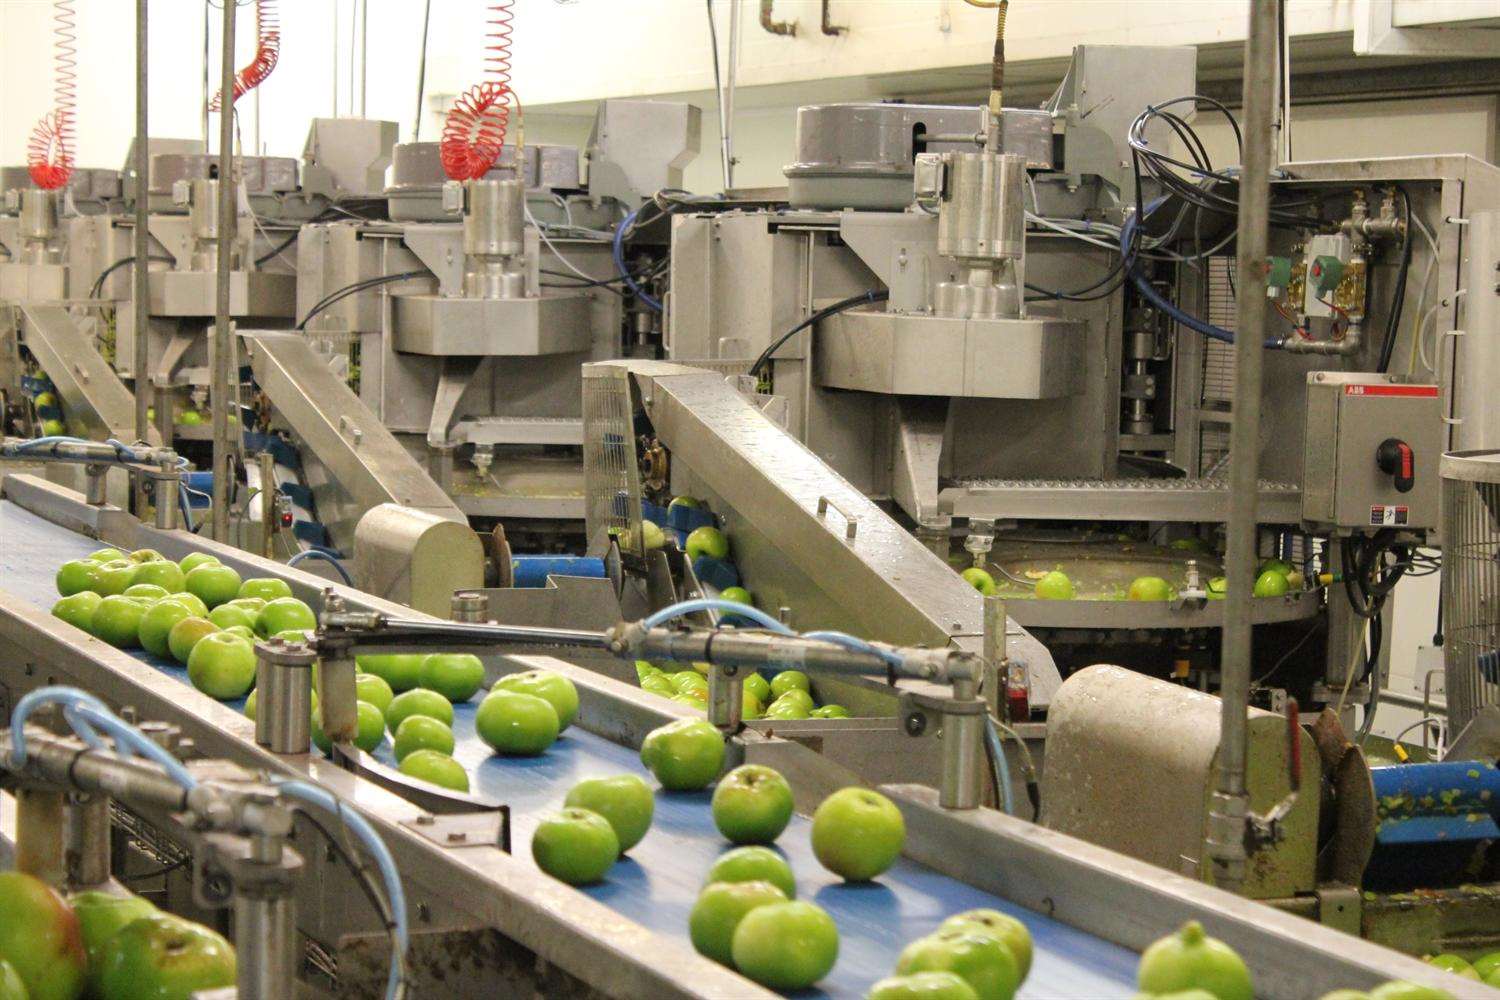 Fourayes Farm is the UK's largest grower and processor of Bramley apples